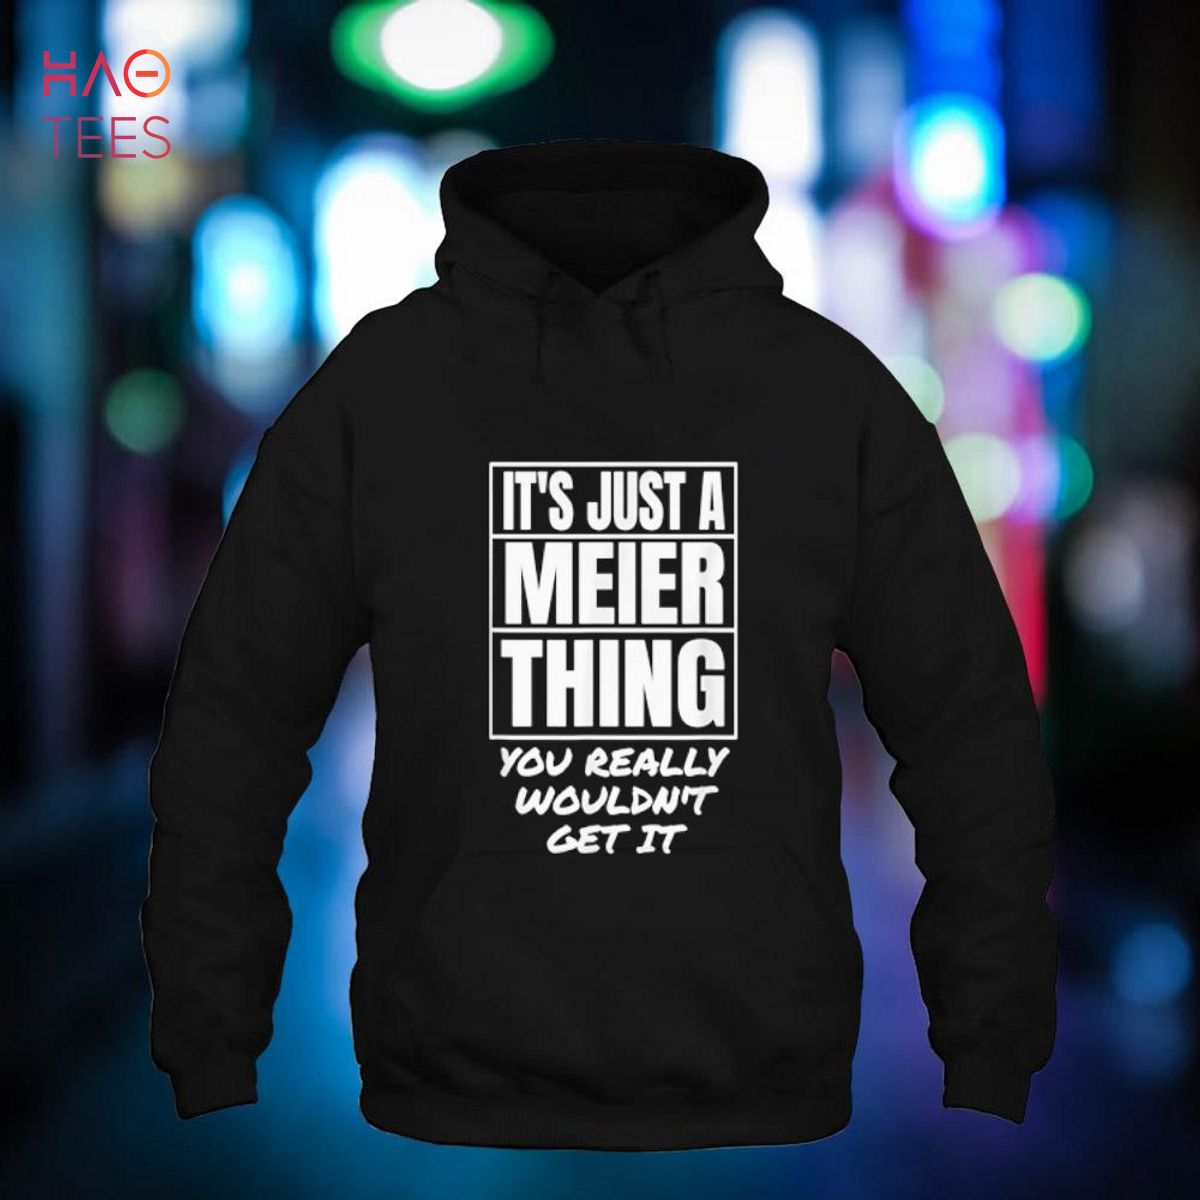 It's Just A Meier Thing You Really Wouldn't Get It Shirt